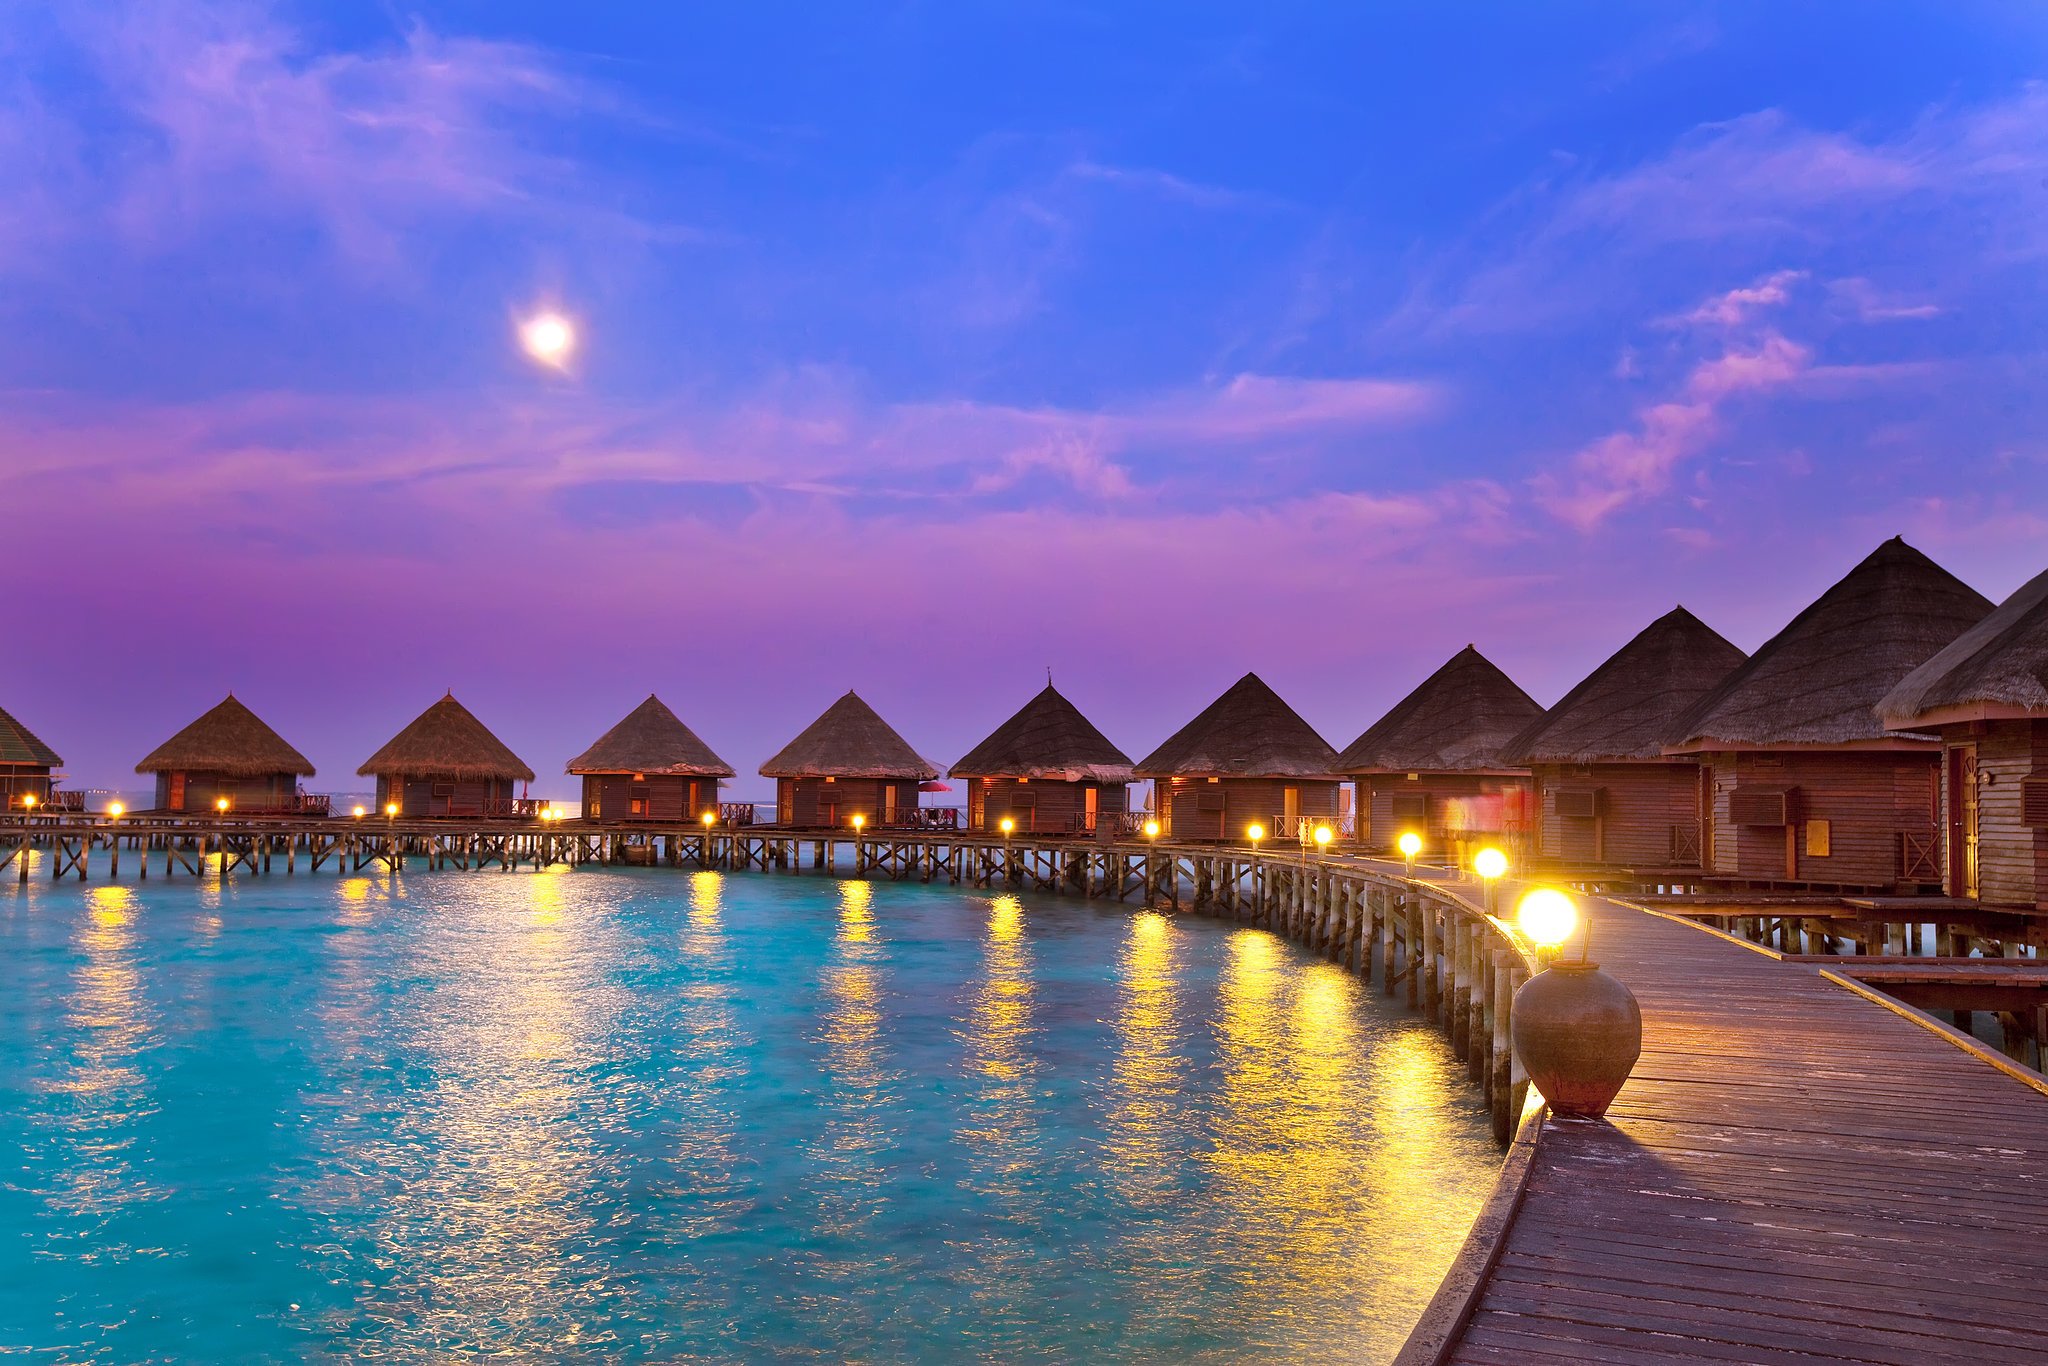 20 maldives 4K wallpapers for your desktop or mobile screen free